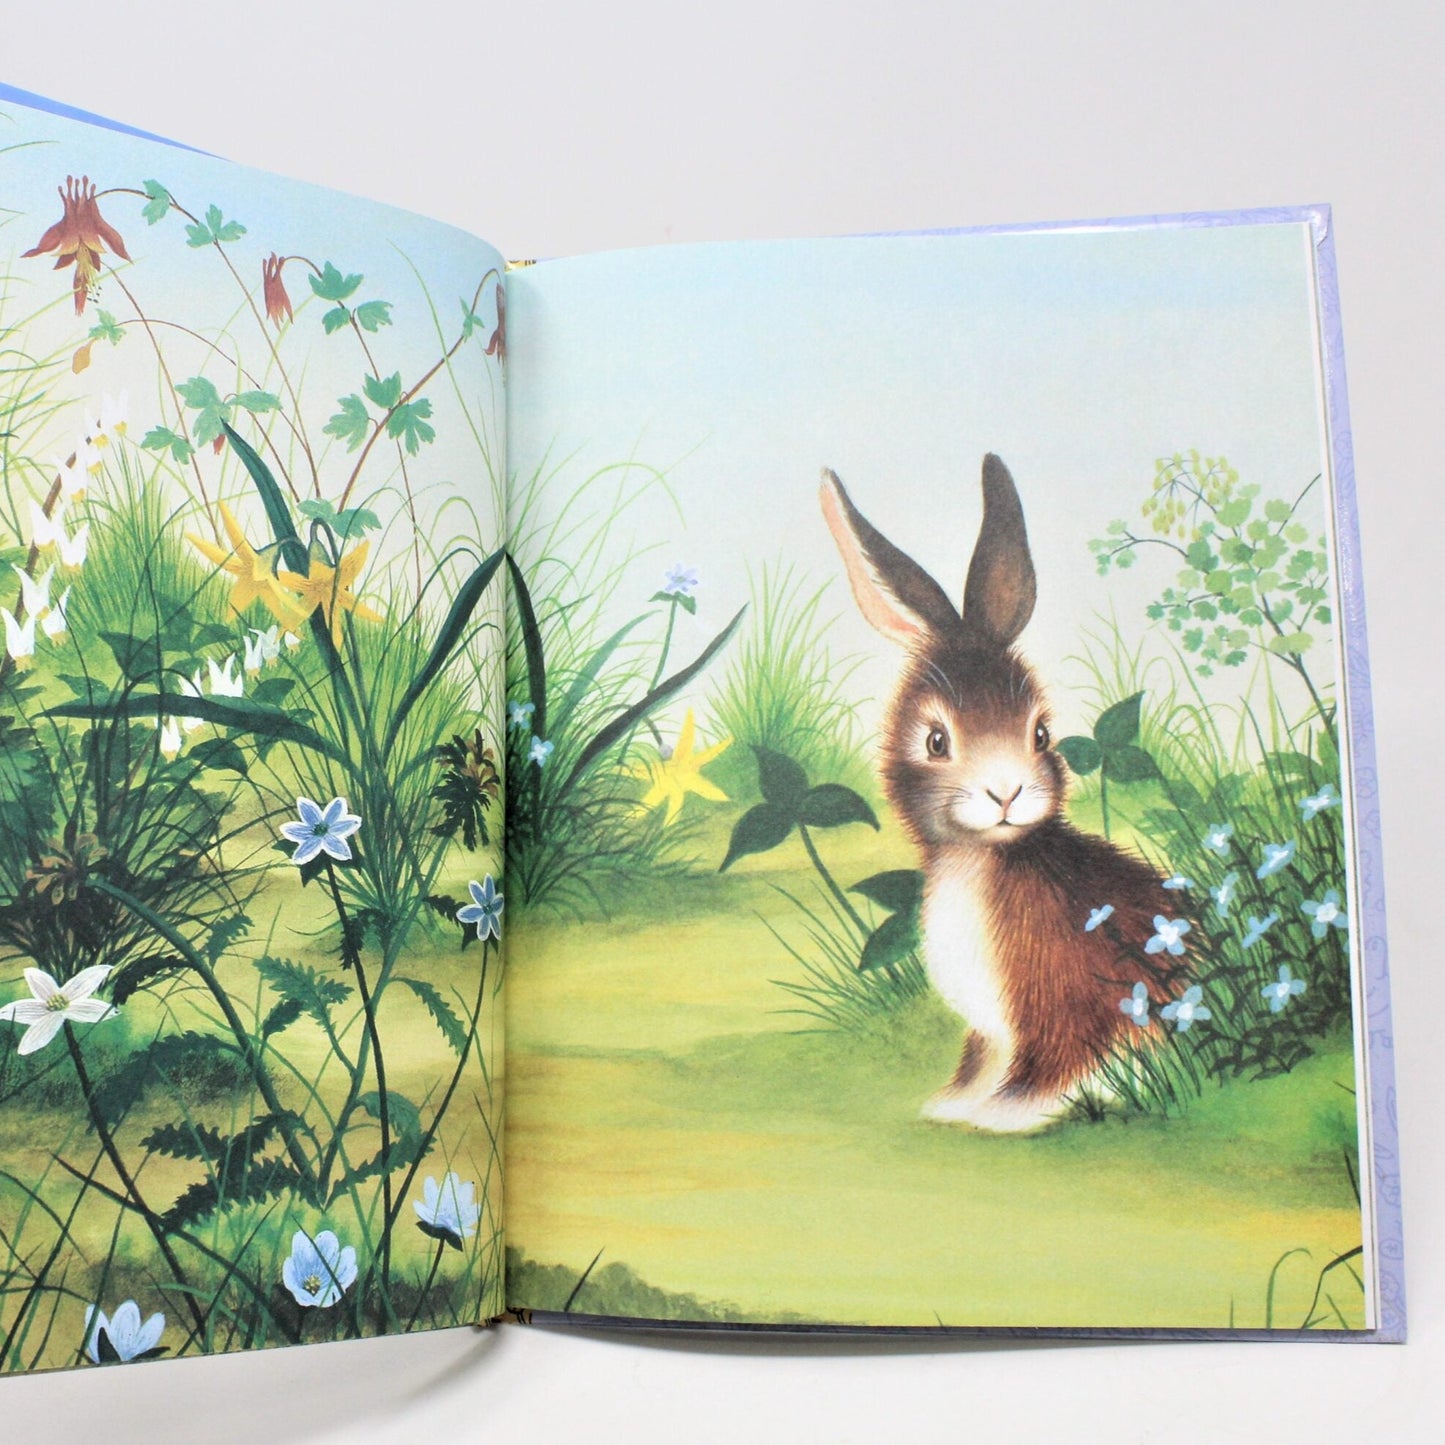 Children's Book, Big Little Golden Book, Home for a Bunny, Hardcover, 2005